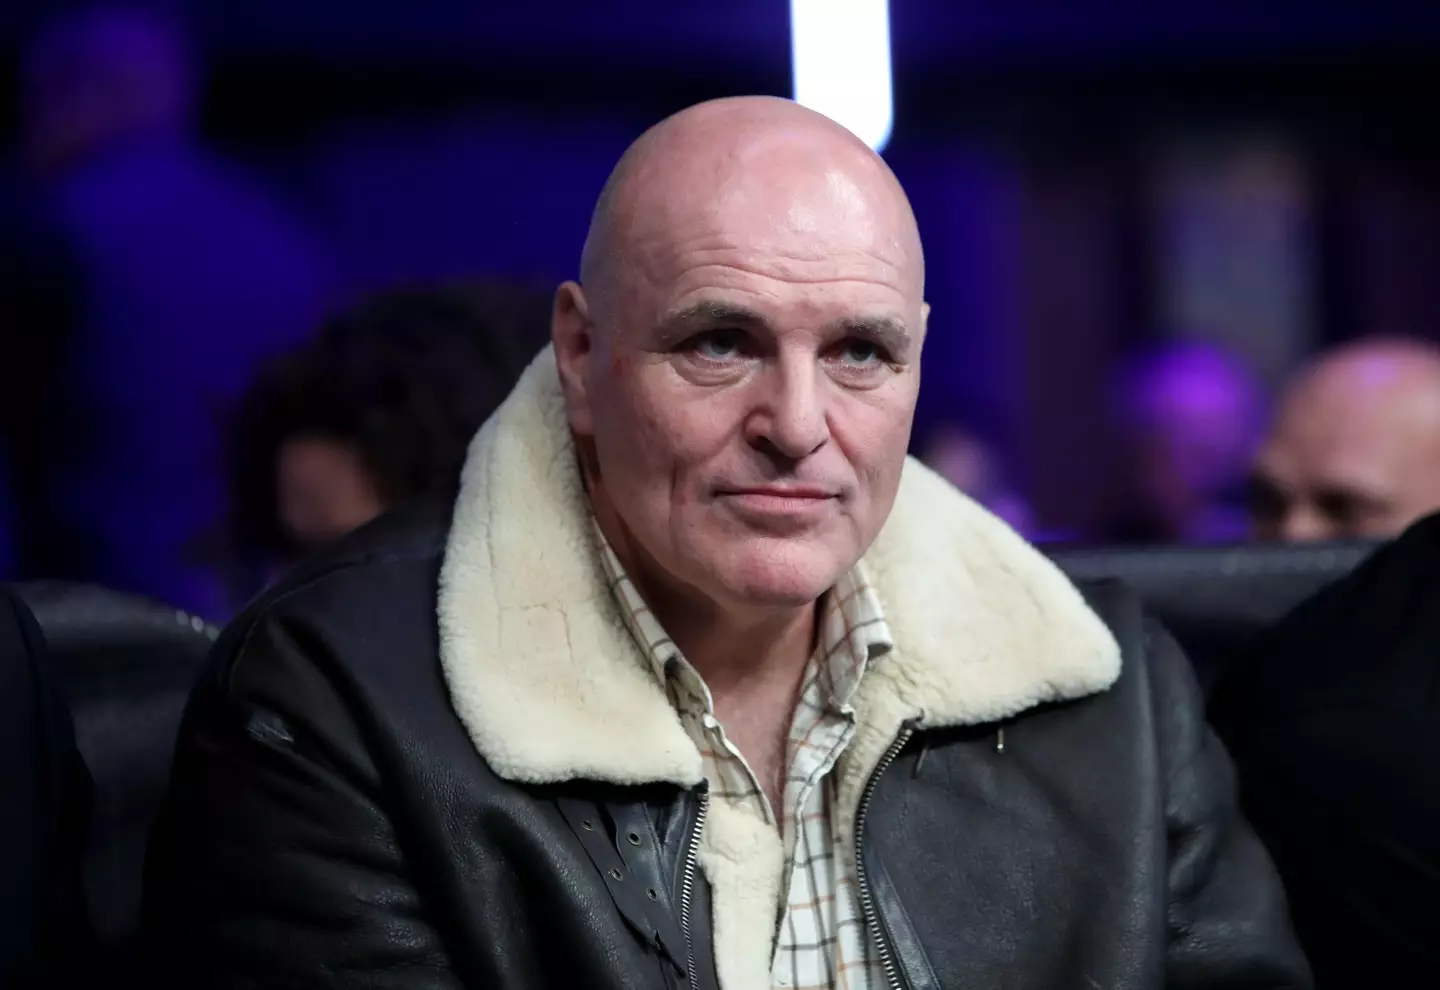 John Fury offered to fight Dillian Whyte's dad or anyone else.